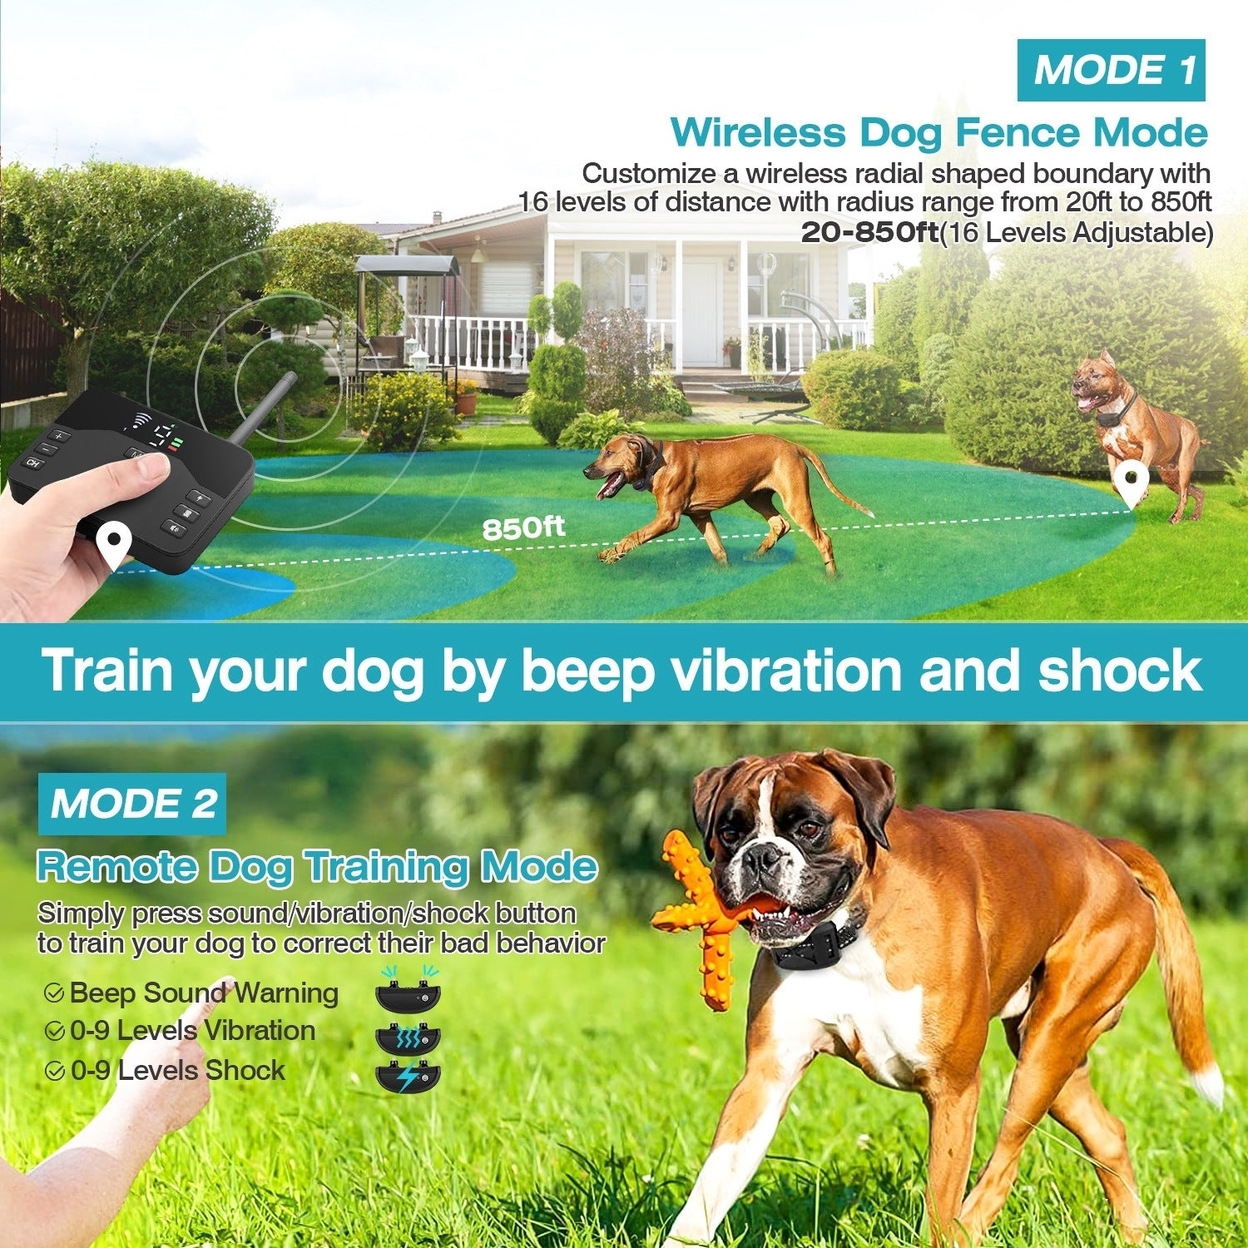 Dsermall 2 In 1 Wireless Electric Dog Fence Waterproof Pet Shock Boundary Containment System Electric Training Collar for Small Medium